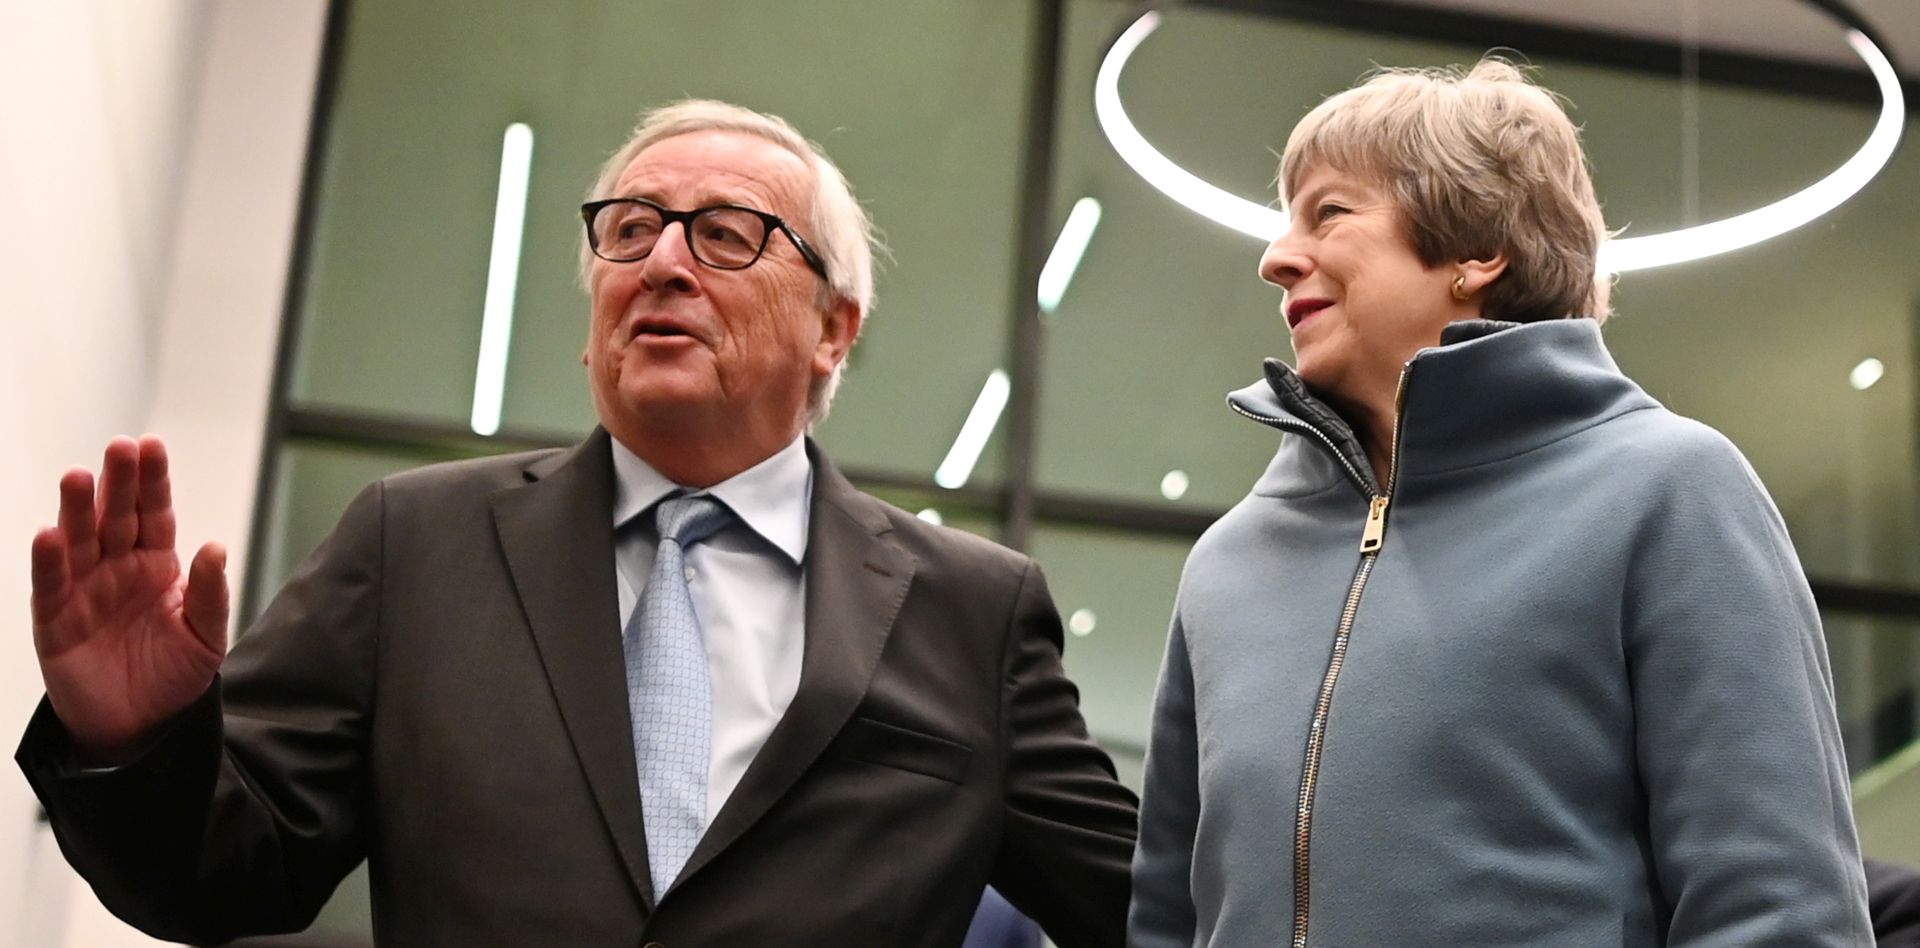 epa07429702 Jean-Claude Juncker, President of the European Commission, (L) welcomes British Prime Minister Theresa May (R) at the European Parliament in Strasbourg, France, 11 March 2019. May is facing a decisive week ahead with crucial votes on Brexit expected.  EPA/PATRICK SEEGER